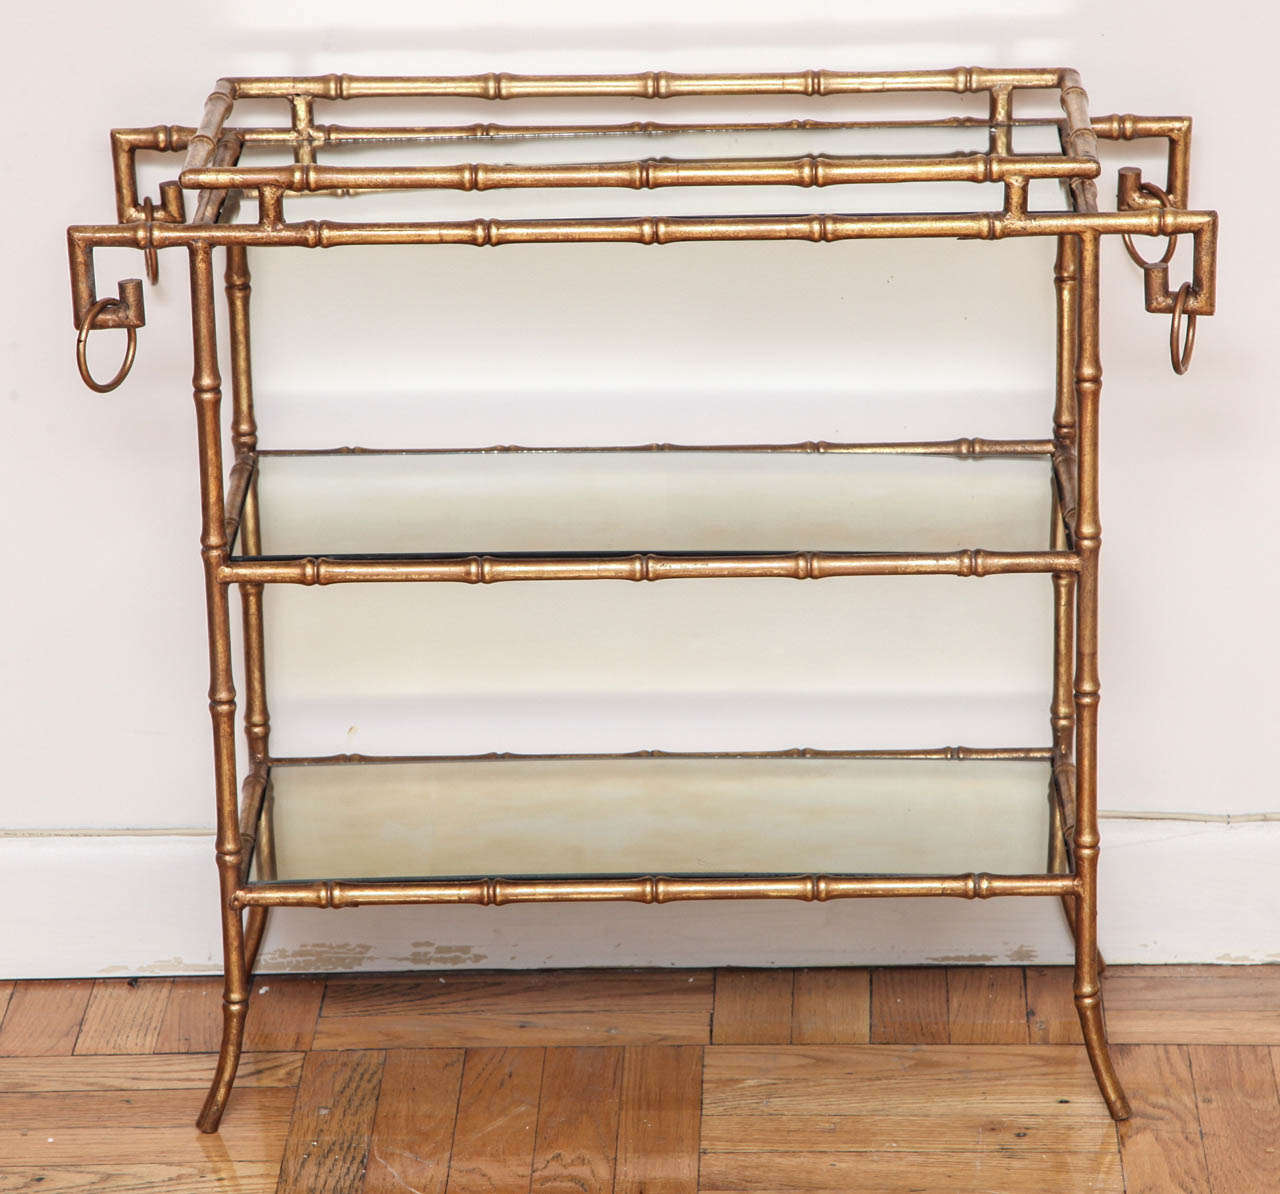 A Pair of Antique Gilt Metal Faux Bamboo 3-tier Etagere Tables with Smoked Mirror Inserts, France, c. 1940